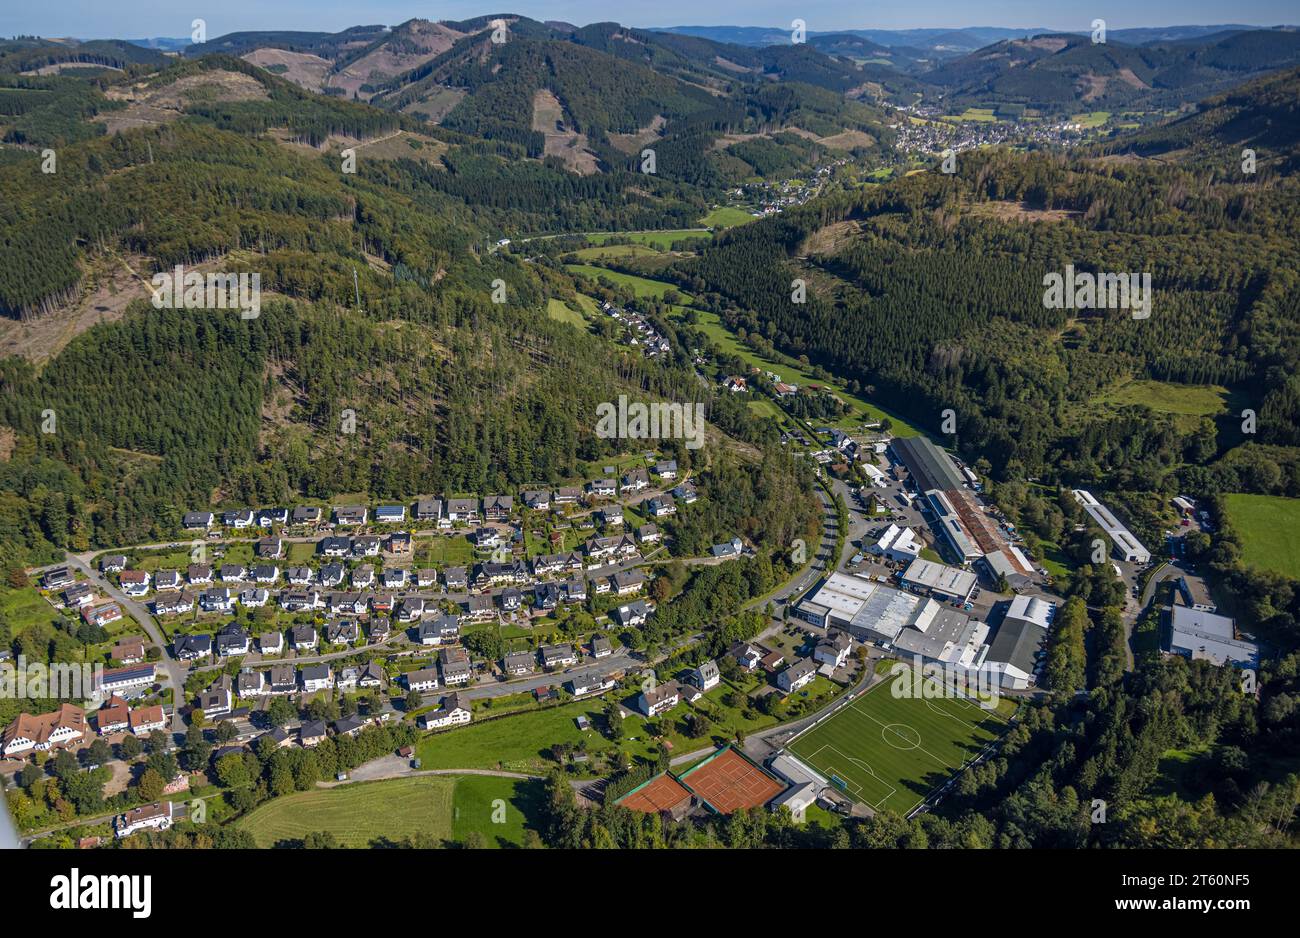 Aerial view, view of the district of Langenei, hilly landscape with forest damage, Langenei, Lennestadt, Sauerland, North Rhine-Westphalia, Germany, T Stock Photo